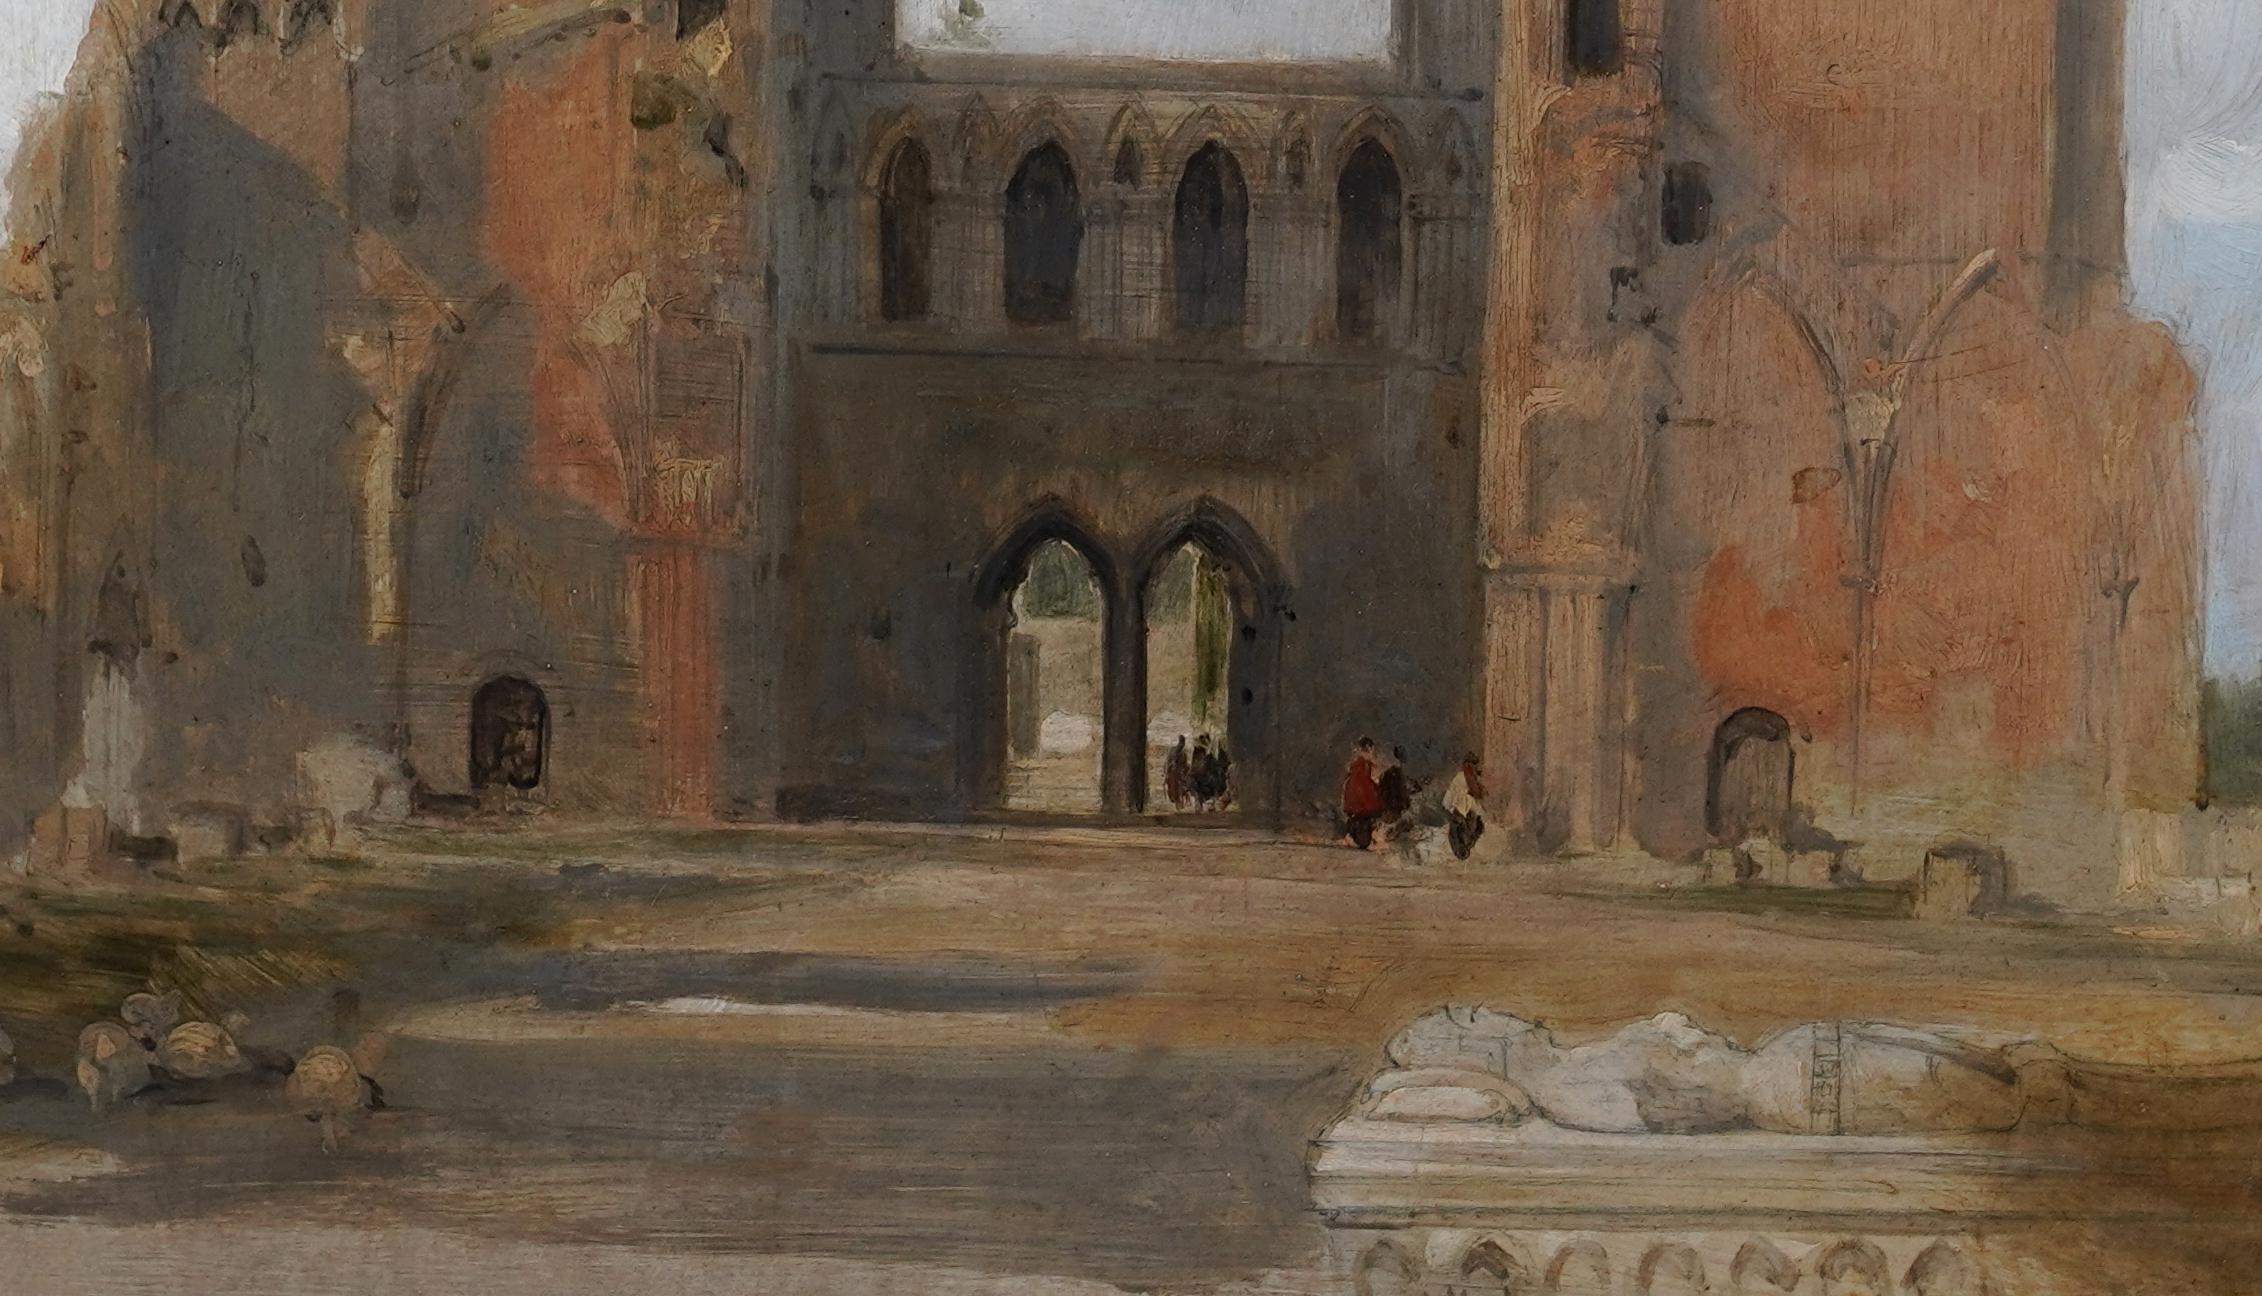 Elgin Cathedral Ruins - Scottish 19thC art architectural landscape oil painting - Realist Painting by David Roberts